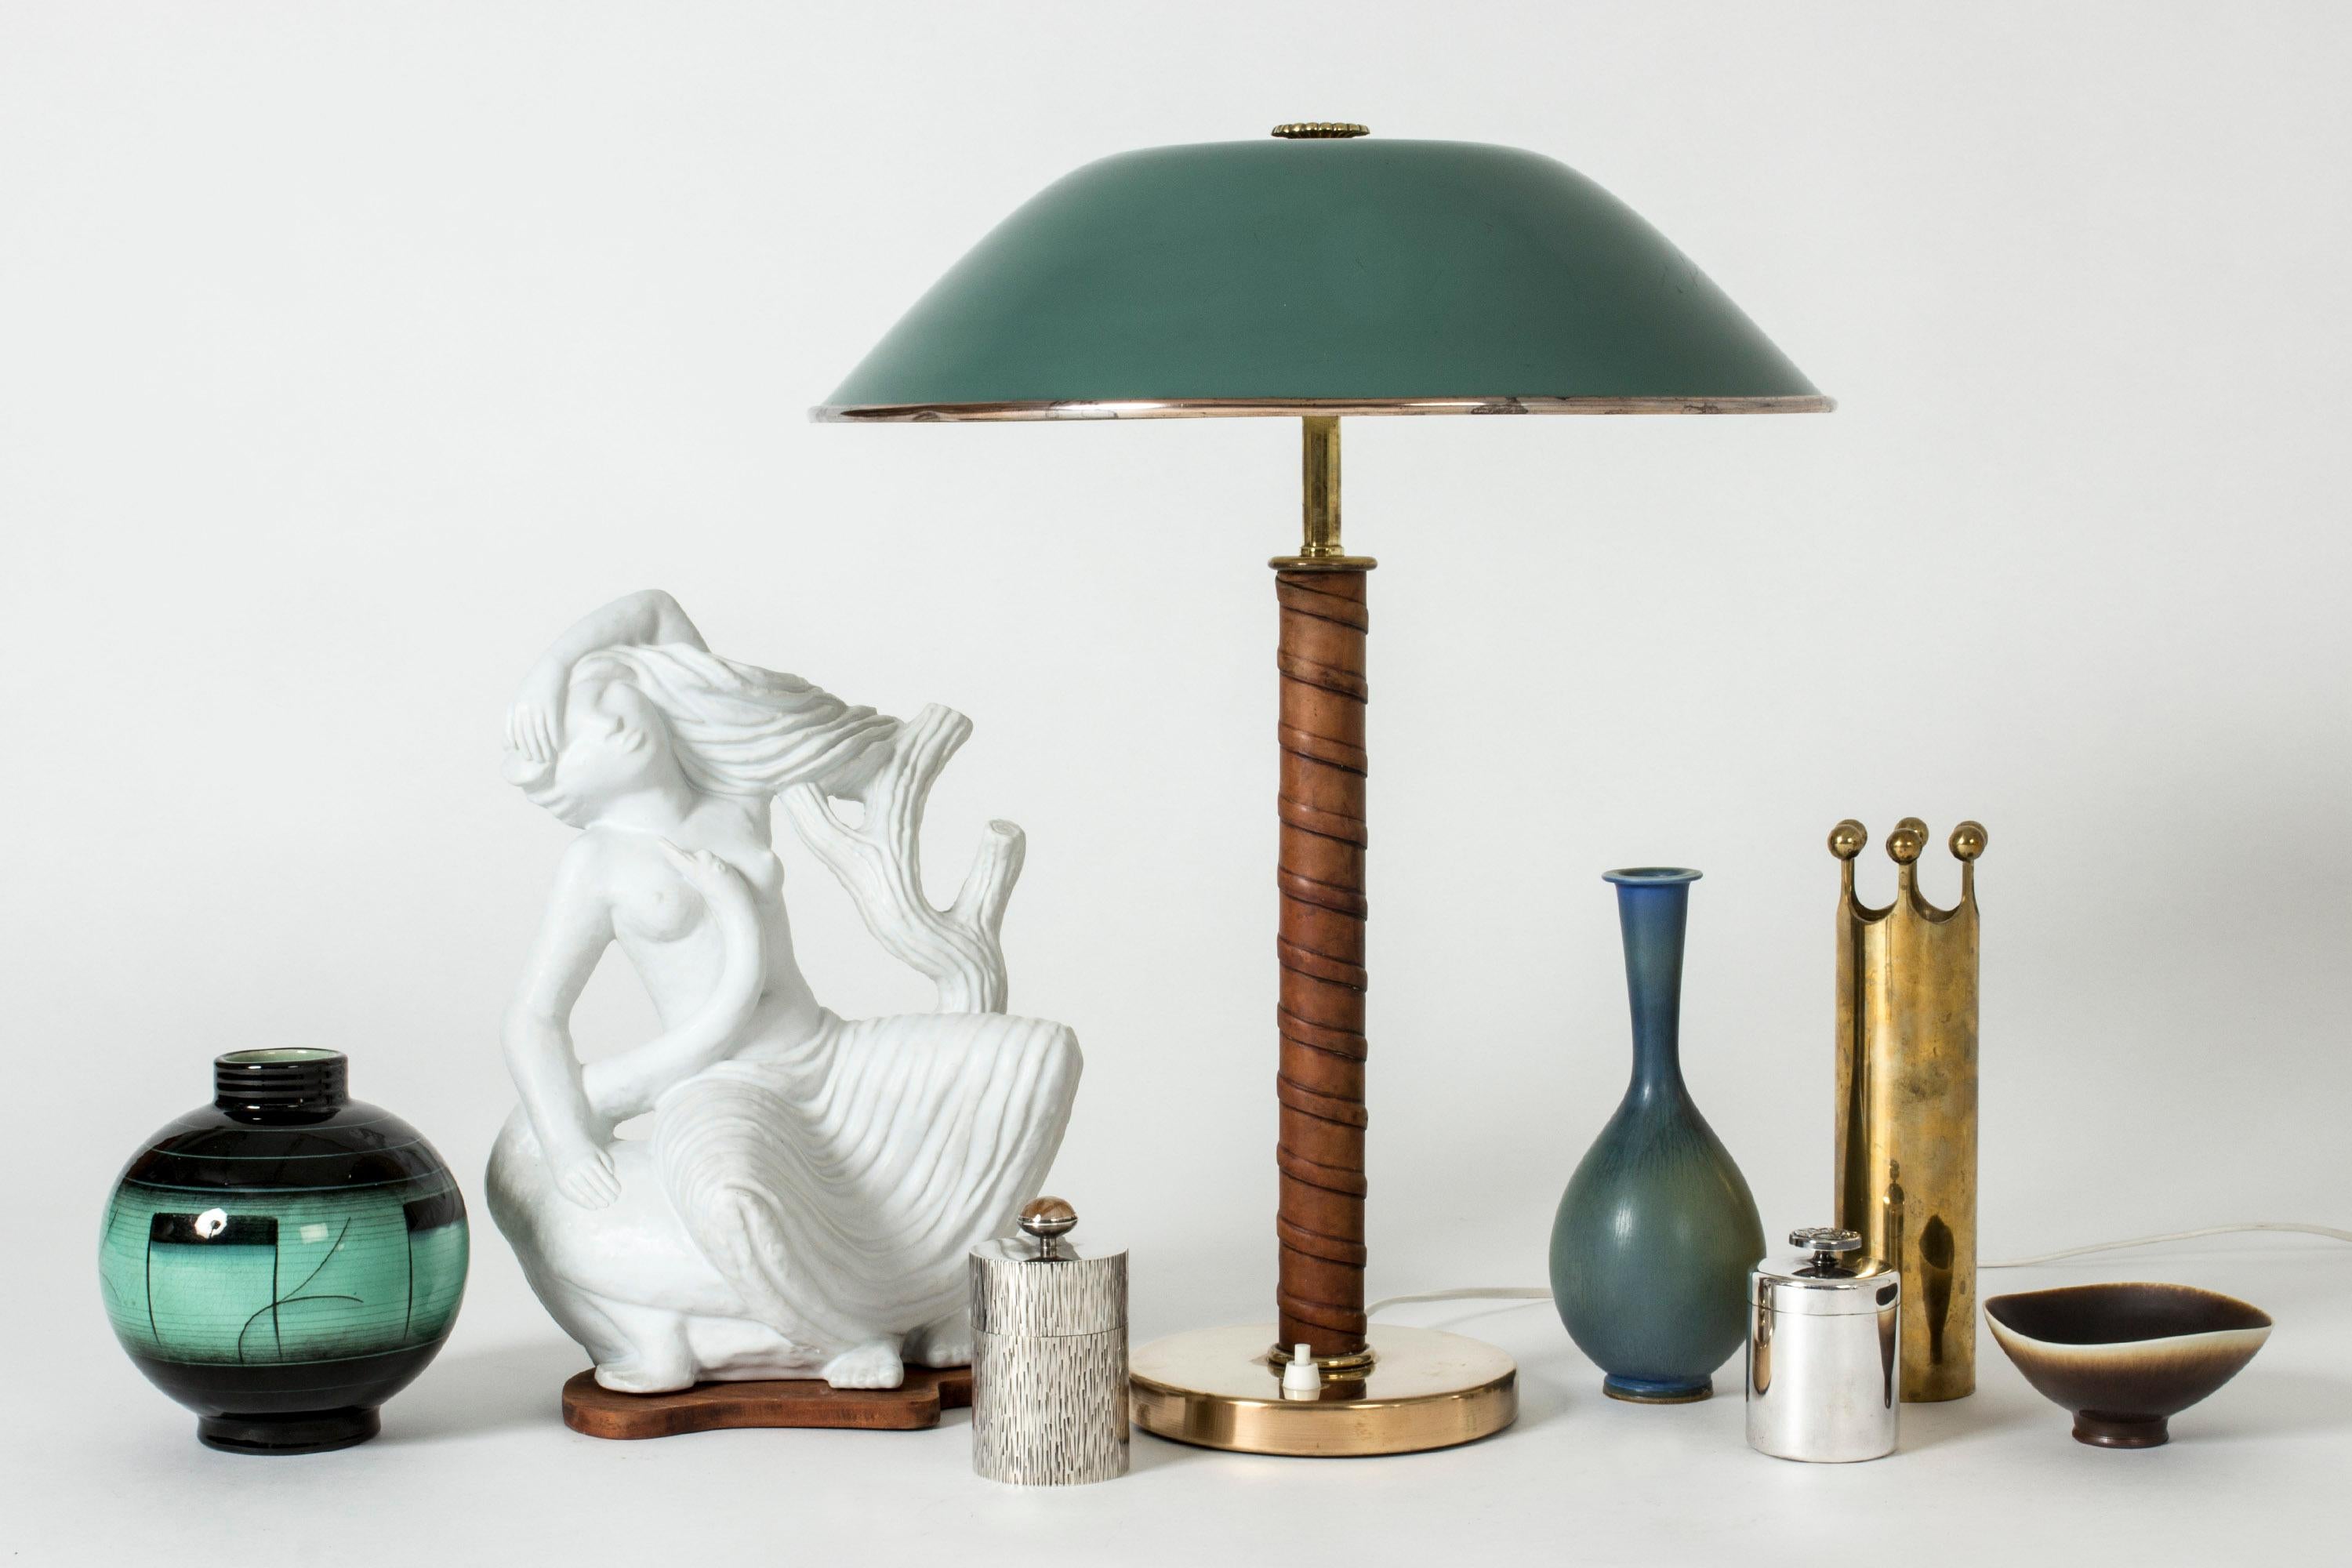 Amazing brass table lamp, with a large green lacquered shade adorned with a brass flower on top. Handle wound with brown leather. Beautiful combination of materials and colors.